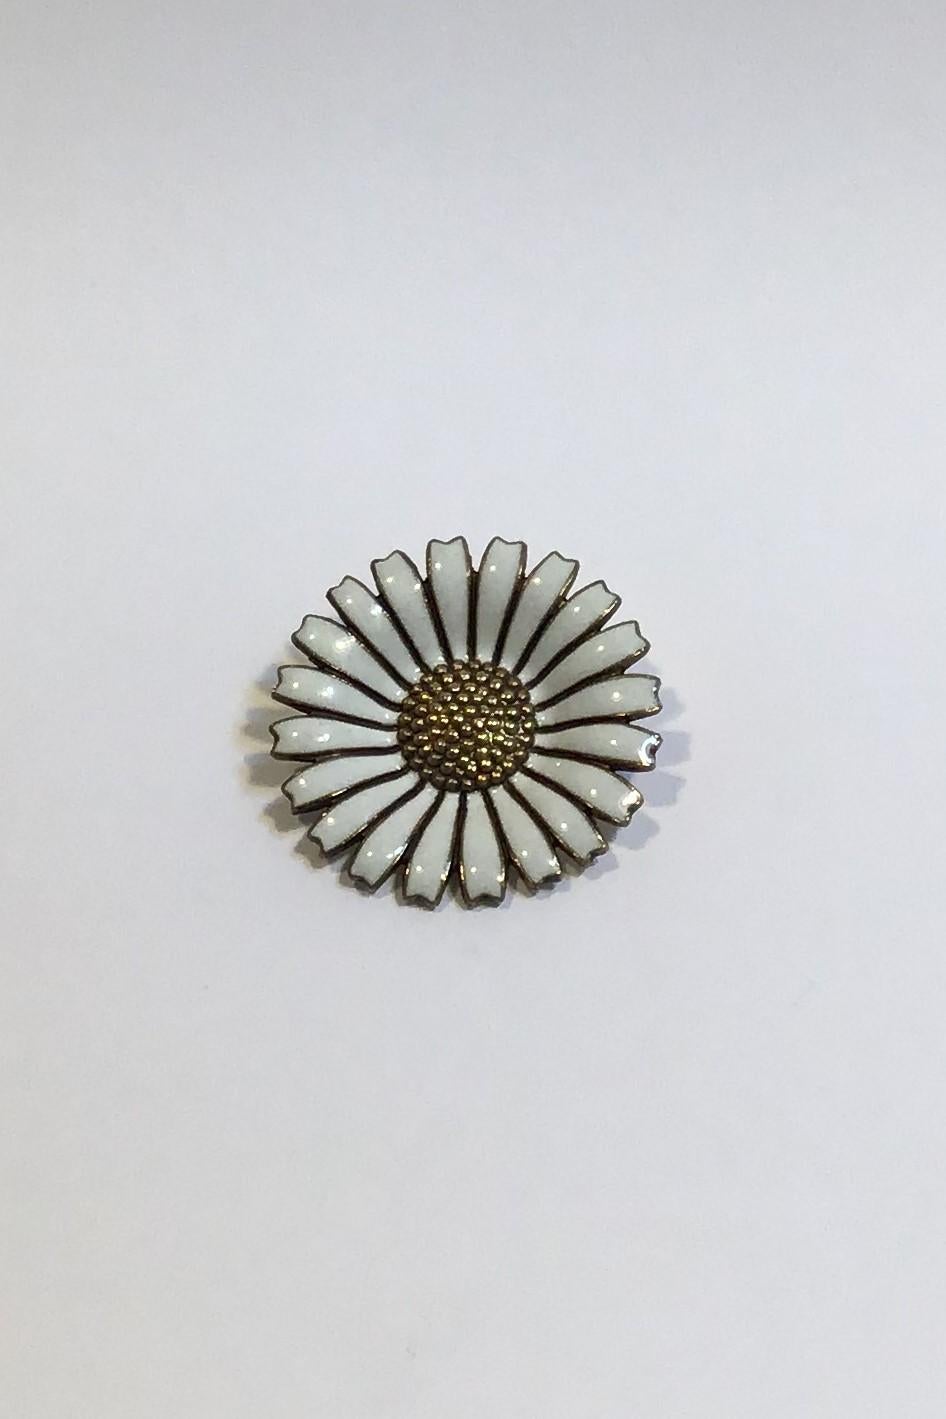 A Michelsen Sterling Silver Marguerit(Daisy) Brooch 

Measures Diam 3.2 cm(1 1/4 in) 
Weight 10 gr/0.35 oz